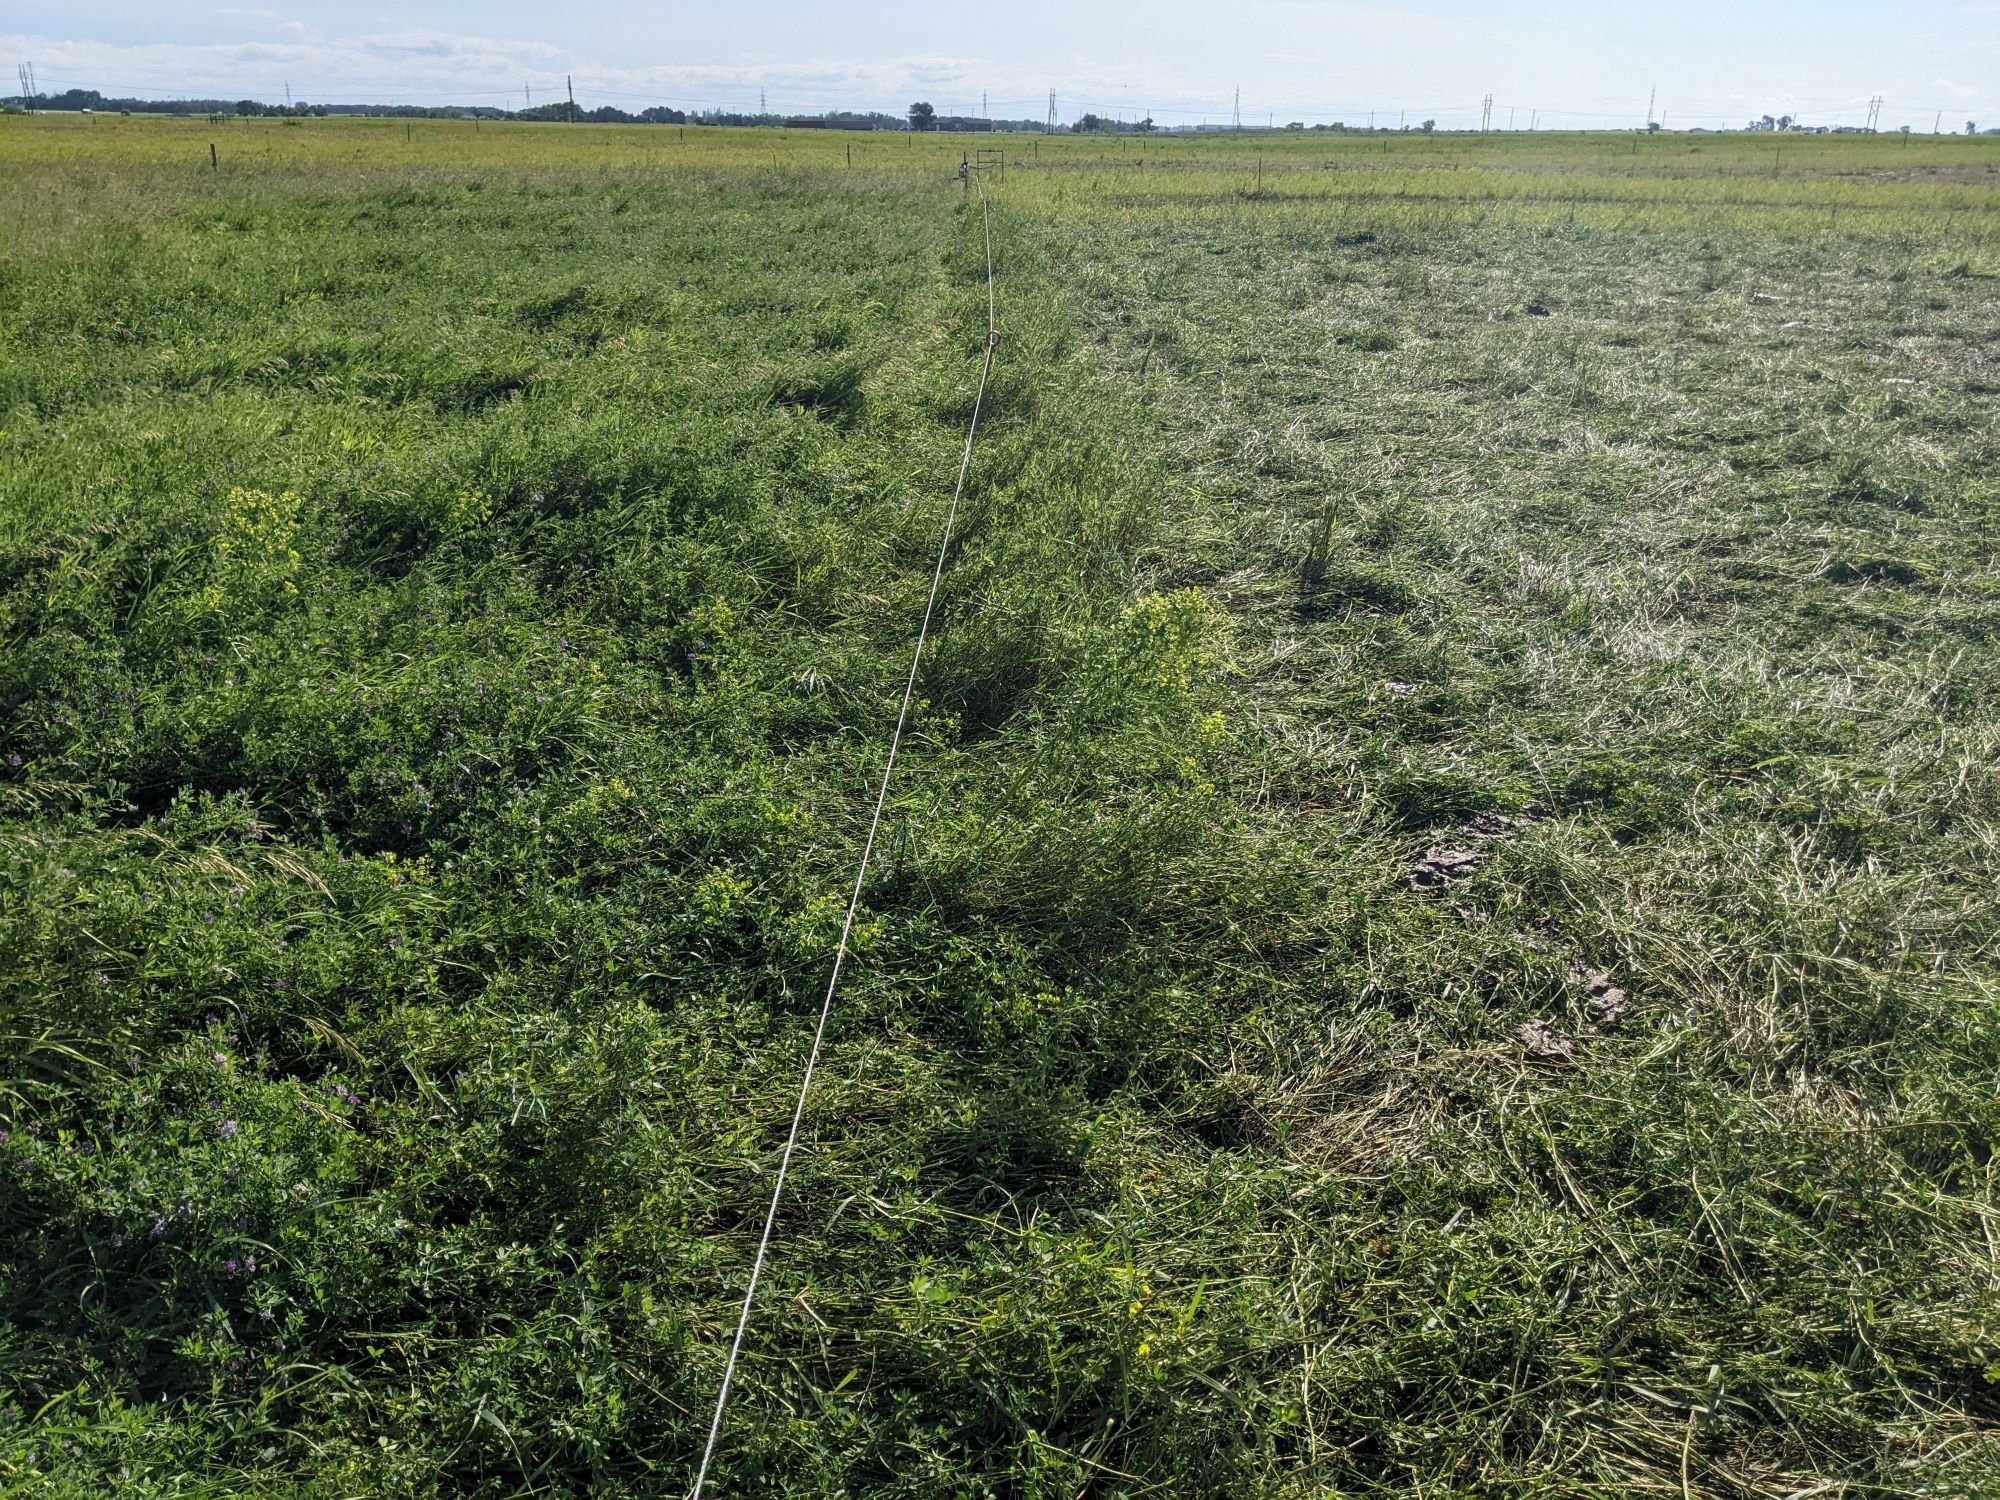 One-day duration treatment. Left has not been grazed yet, right was recently grazed